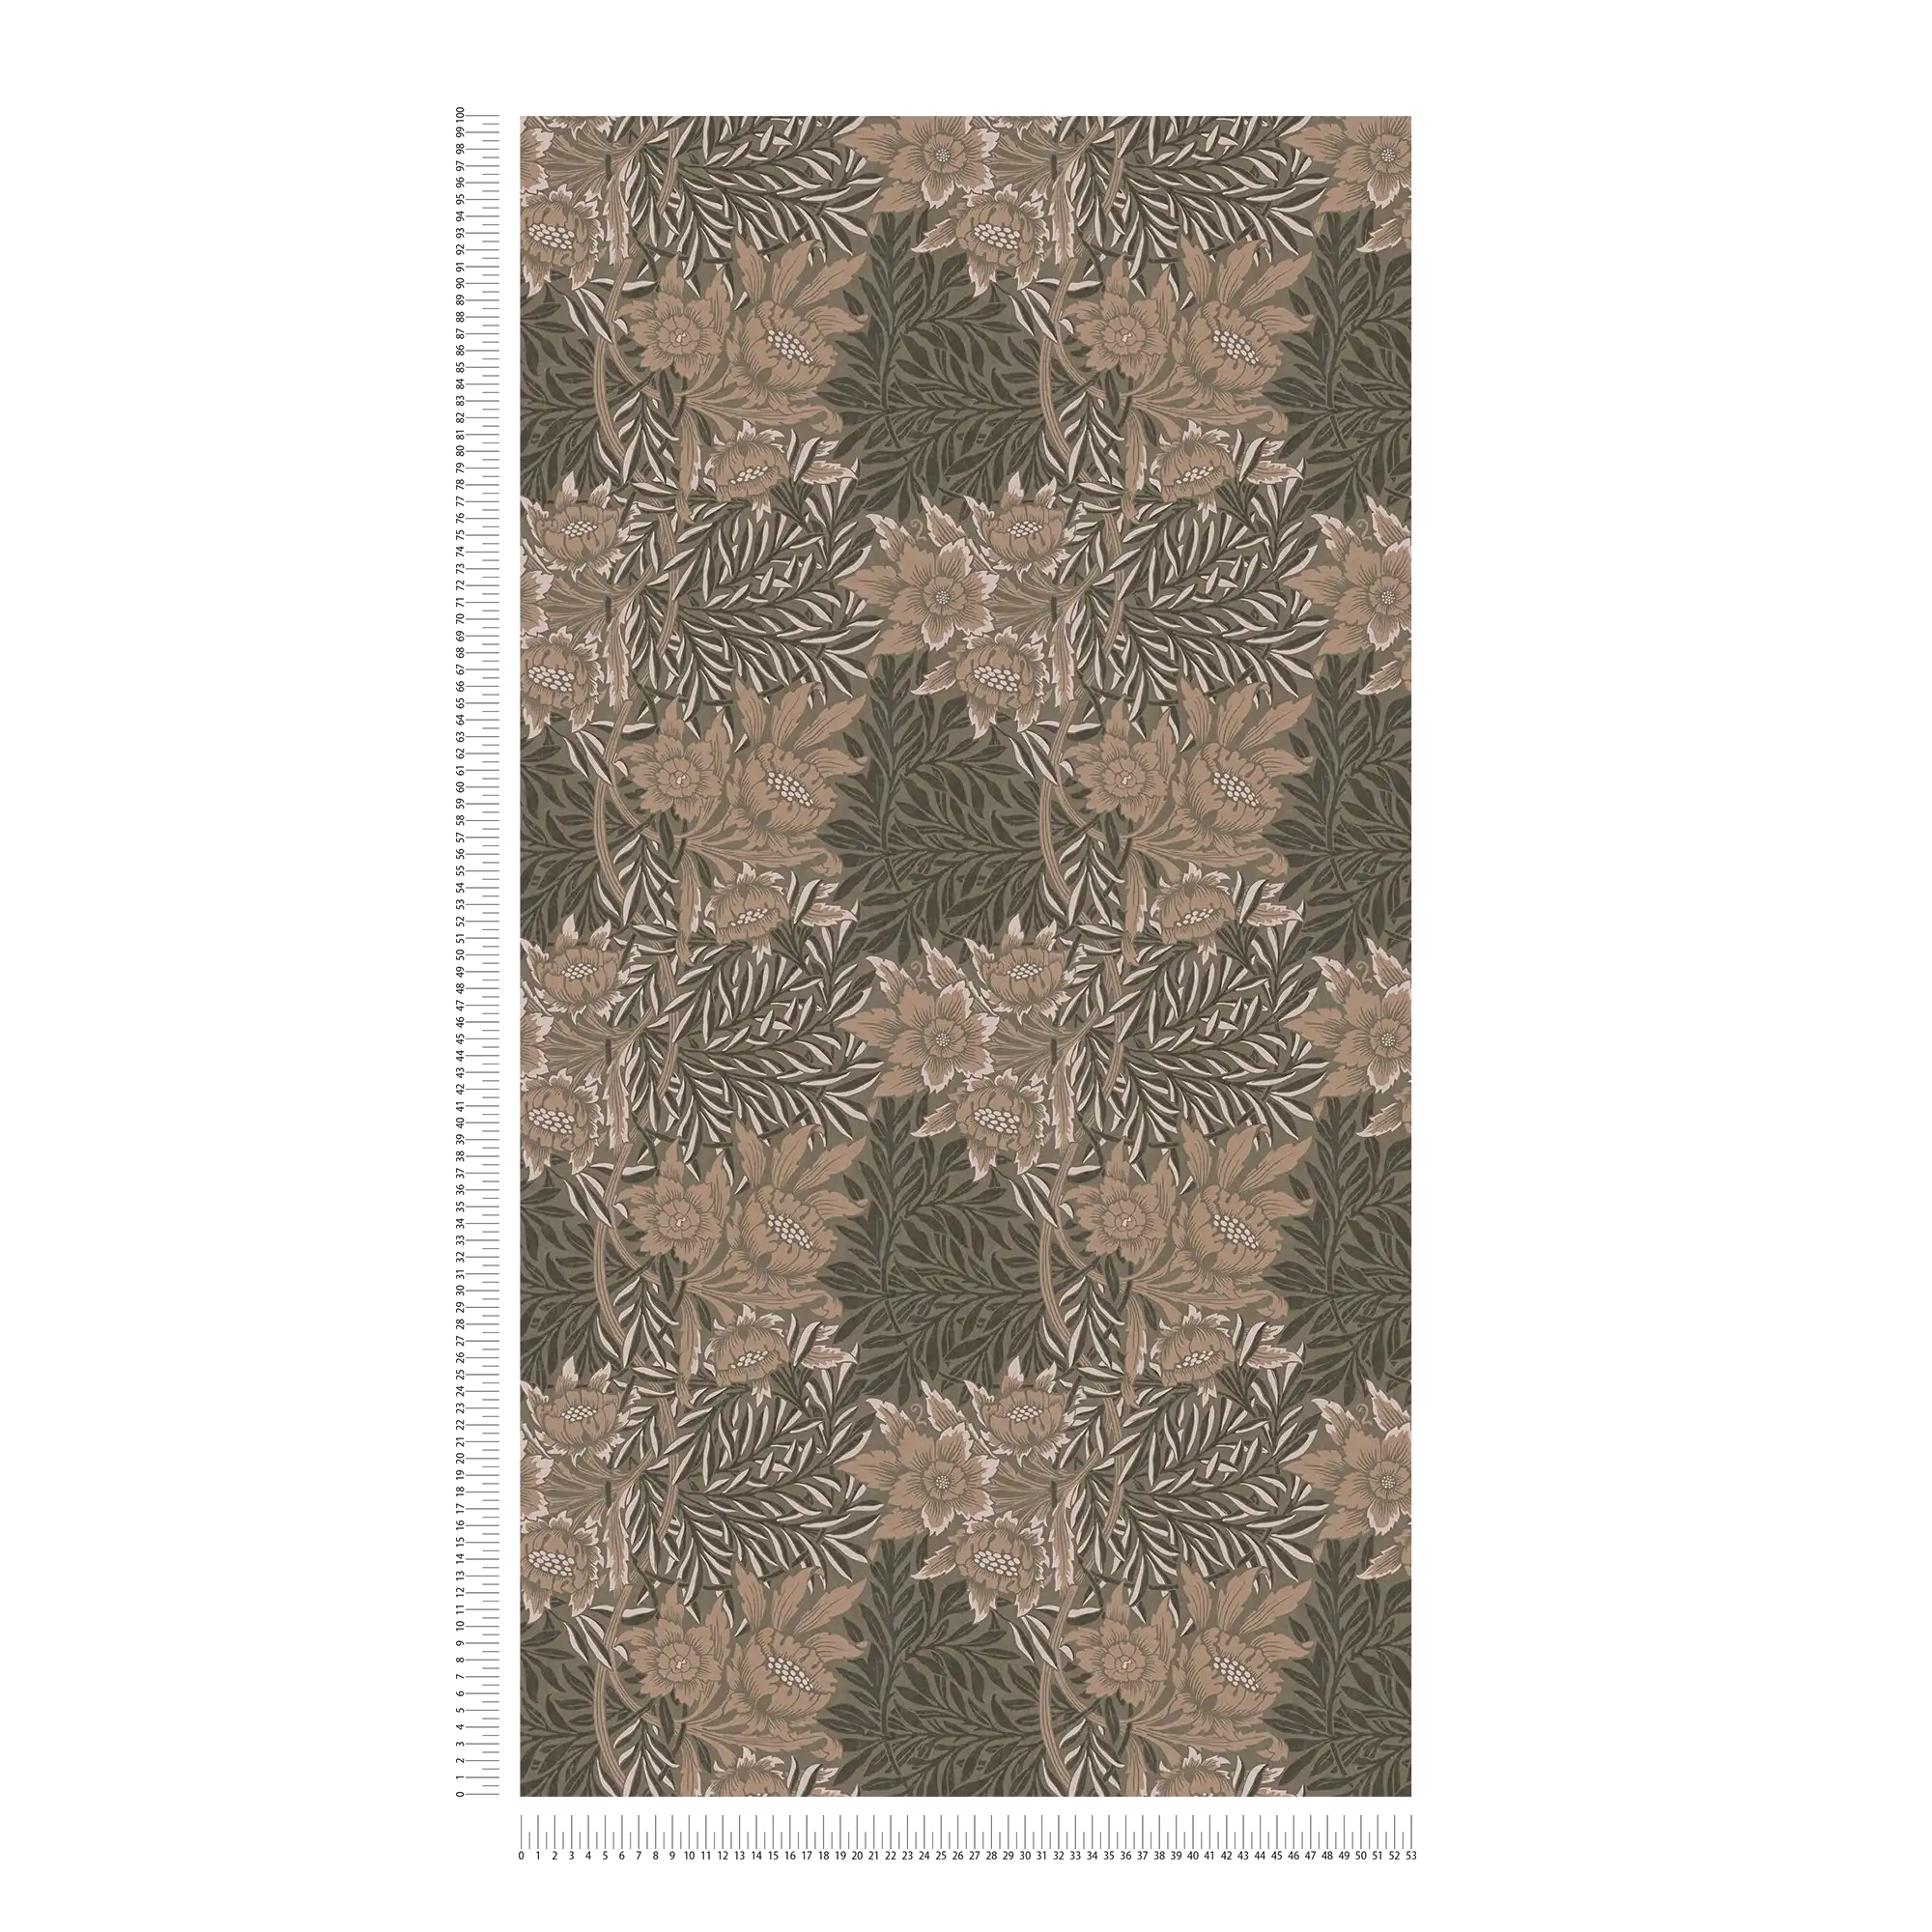             Floral wallpaper with leaf tendrils and flowers - brown, grey, white
        